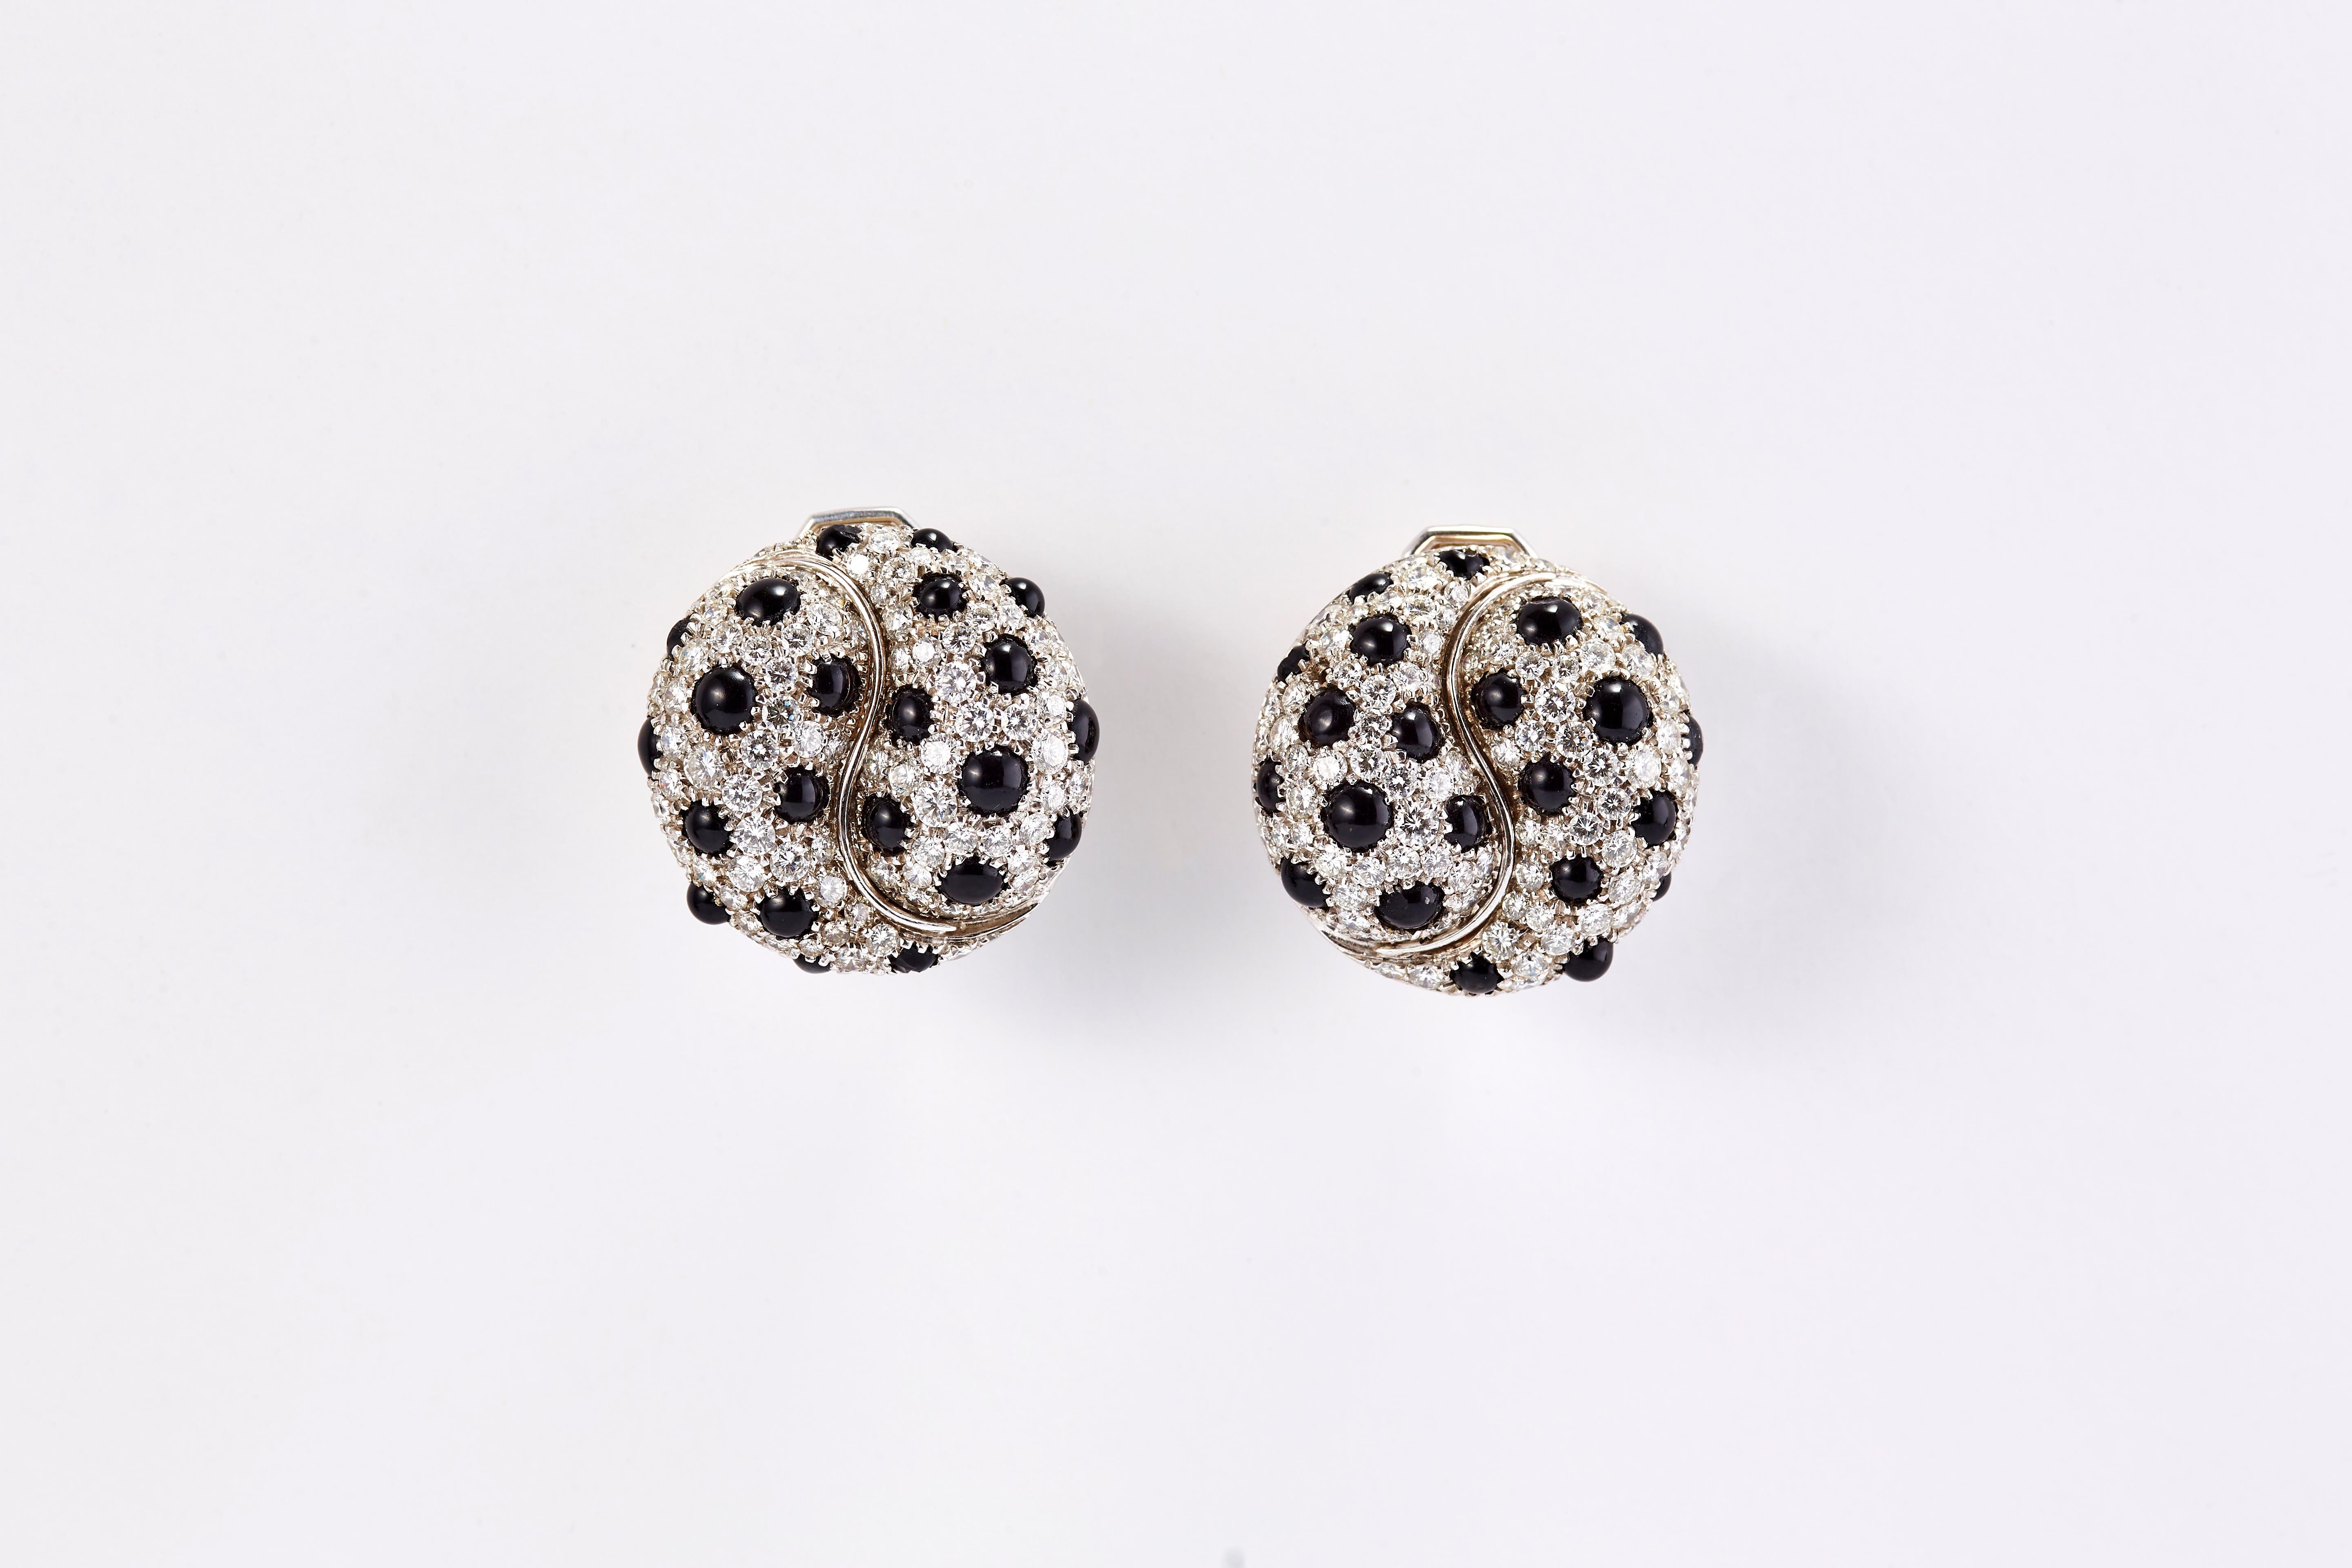 Pair of 18 Karat White Gold Earrings with Diamonds and Onyx In Excellent Condition For Sale In Tel Aviv, IL